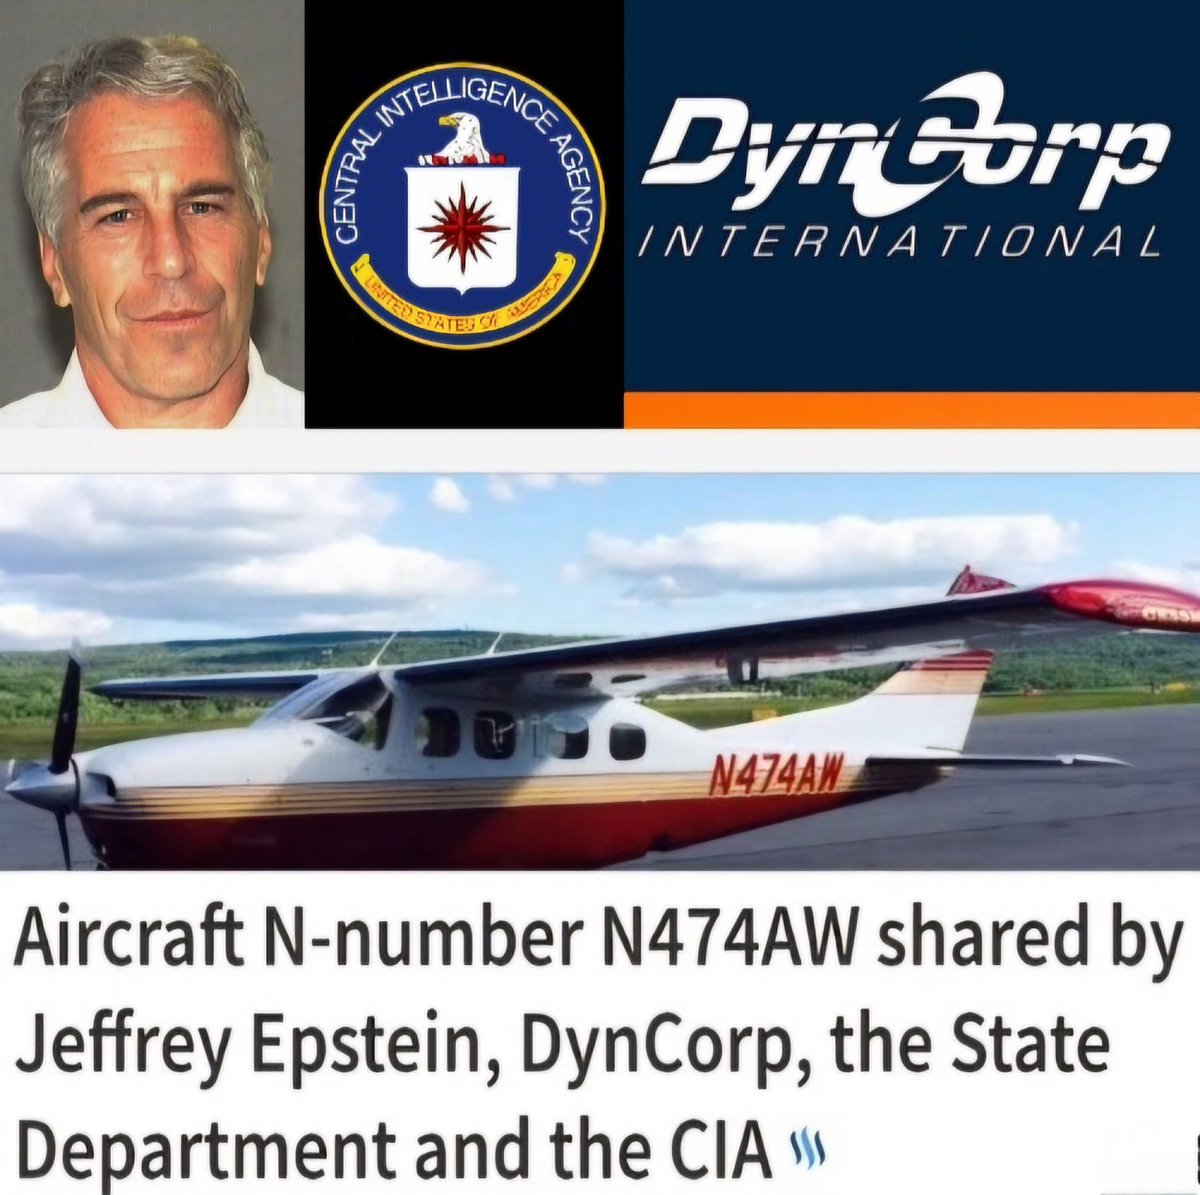 JEFFREY EPSTEIN, CIA, AND DYNCORP MILITARY CONTRACTOR INVOLVED IN CHILD TRAFFICKING

Epstein was working with the US government, CIA, and huge military contractor Dyncorp to traffick children in a massive blackmail ring. They tried to bury this story, but we are bringing it back.…